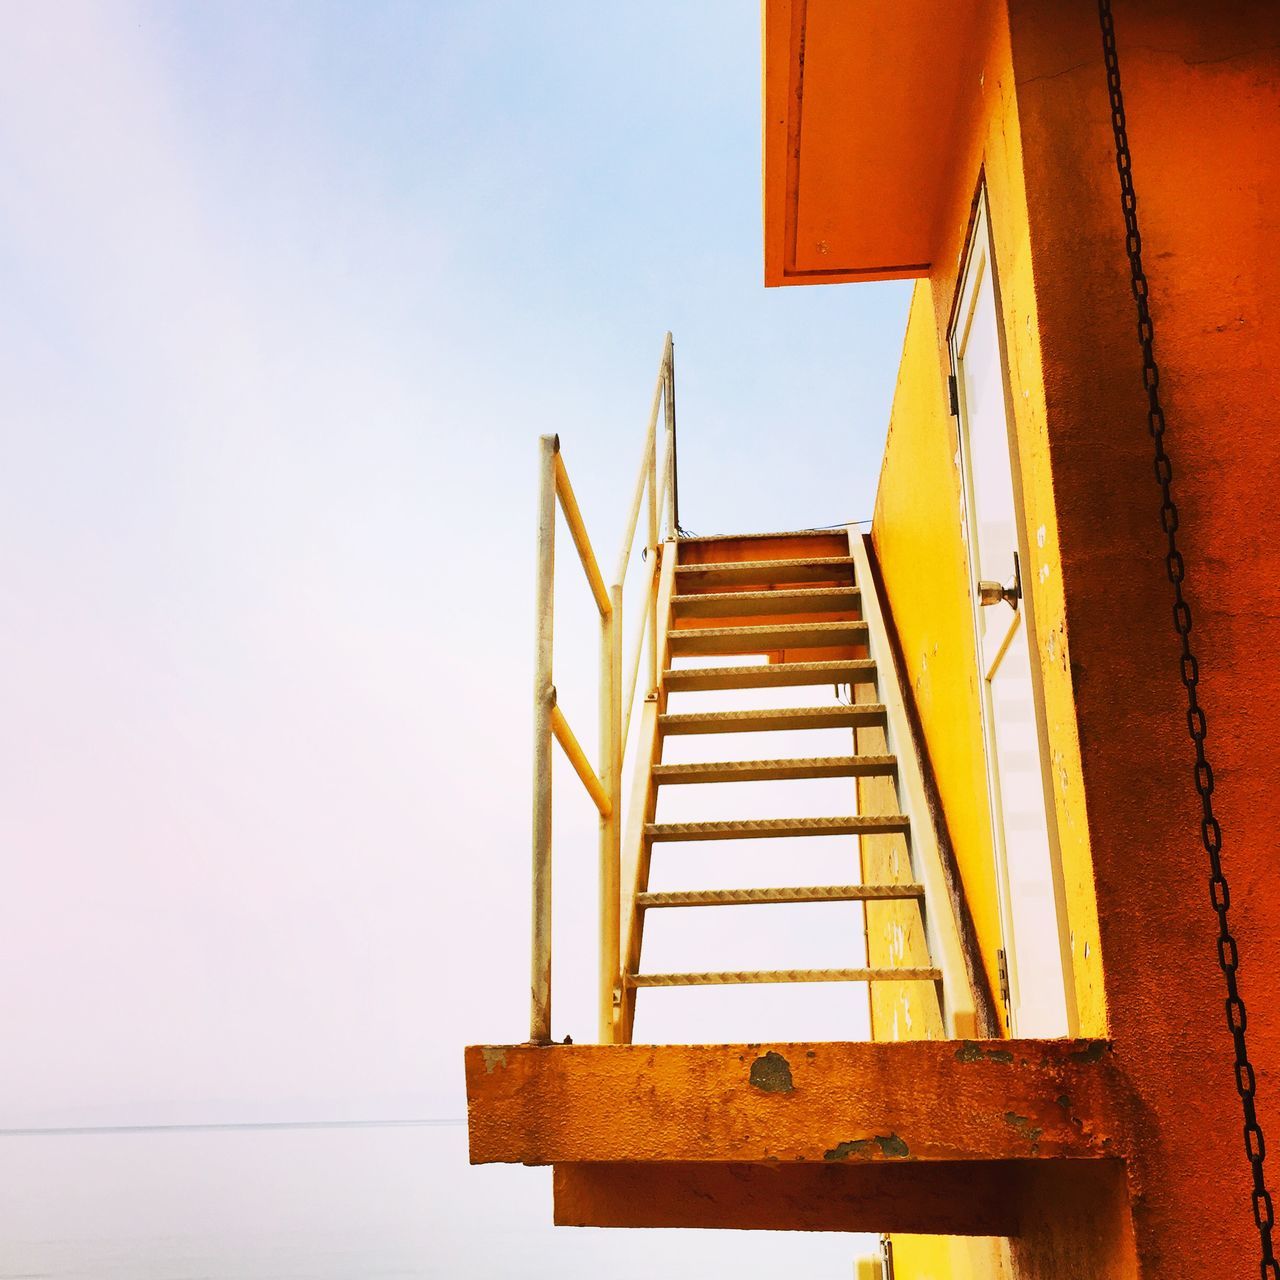 architecture, built structure, low angle view, building exterior, clear sky, building, window, residential structure, residential building, copy space, no people, house, wall - building feature, yellow, day, outdoors, sky, staircase, high section, steps